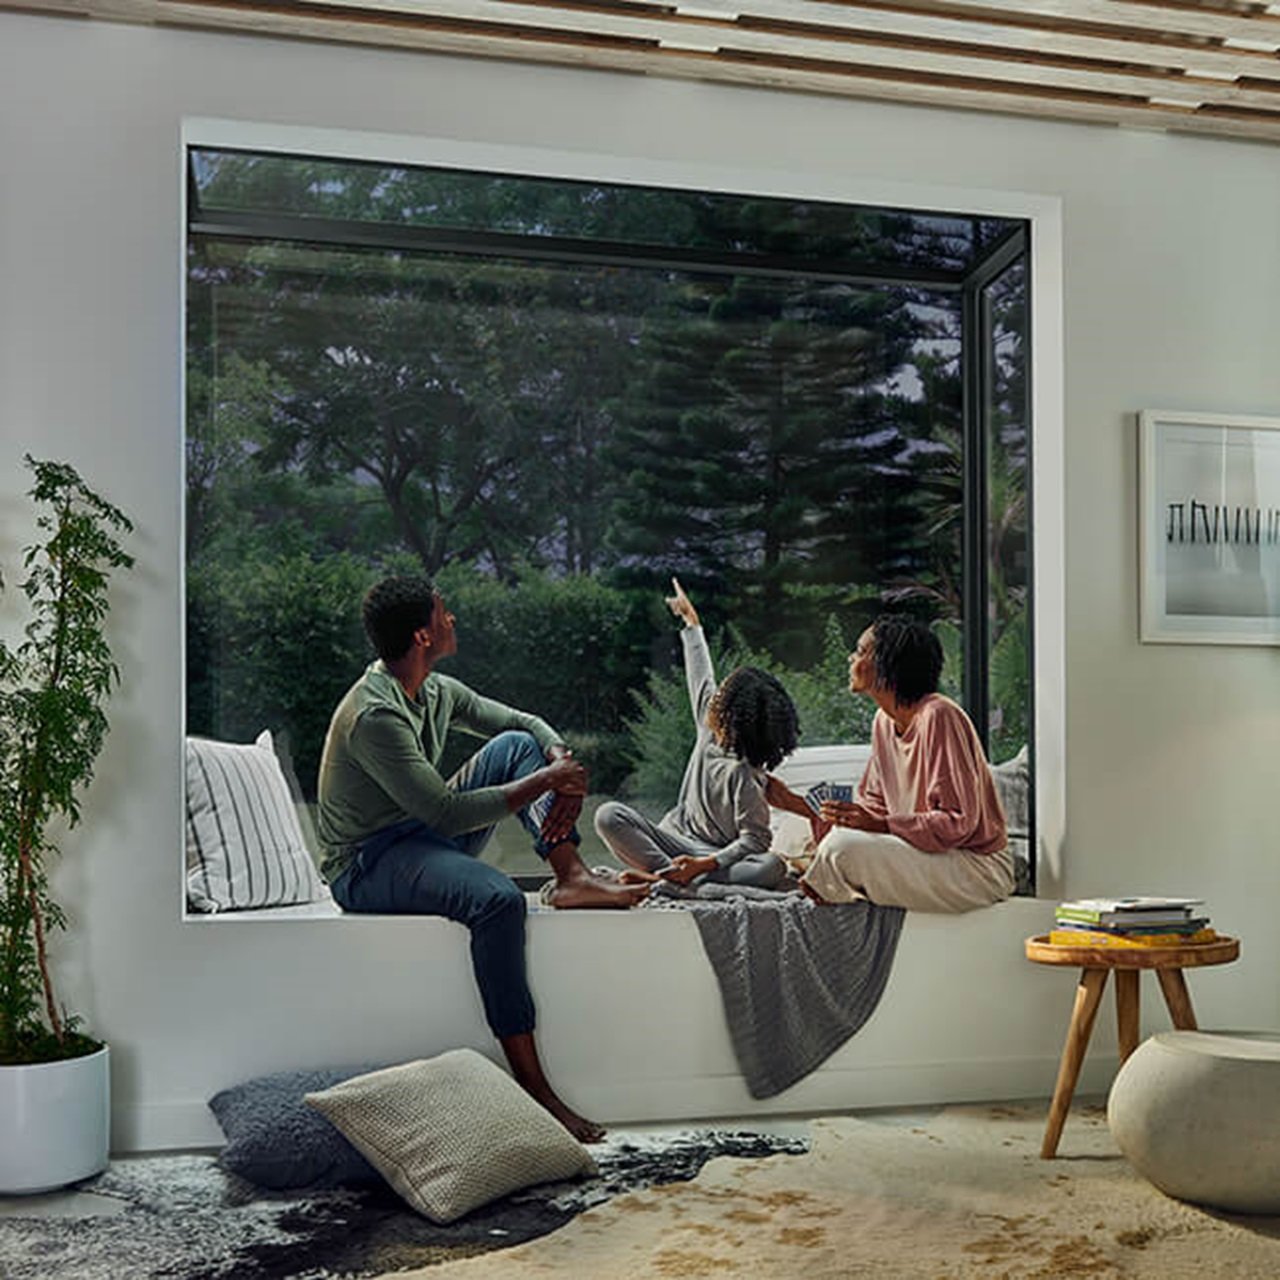 Interior of home with family sitting in Marvin Skycove window box